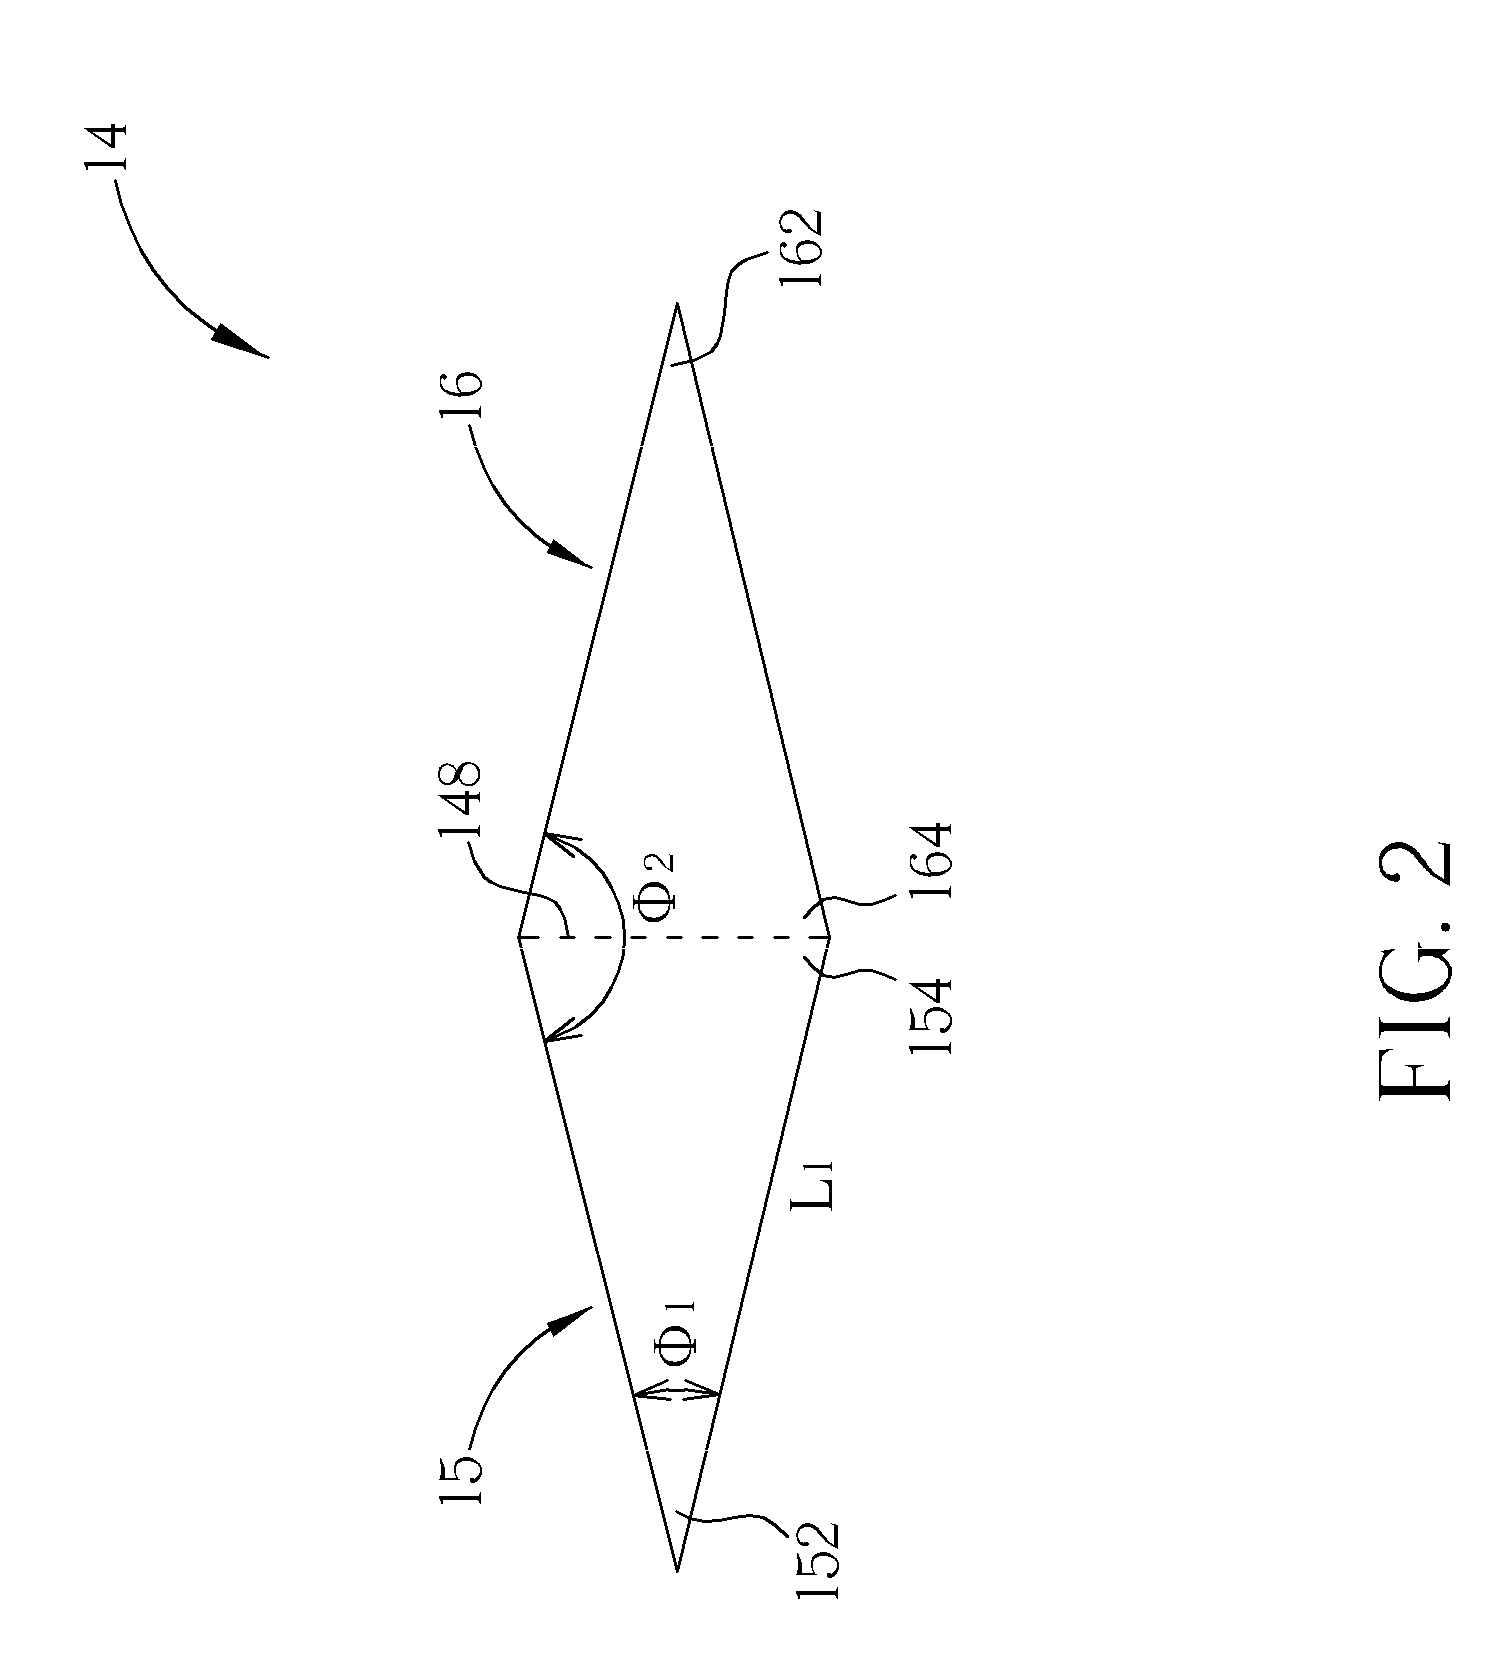 Three-dimensional antenna and related wireless communication device